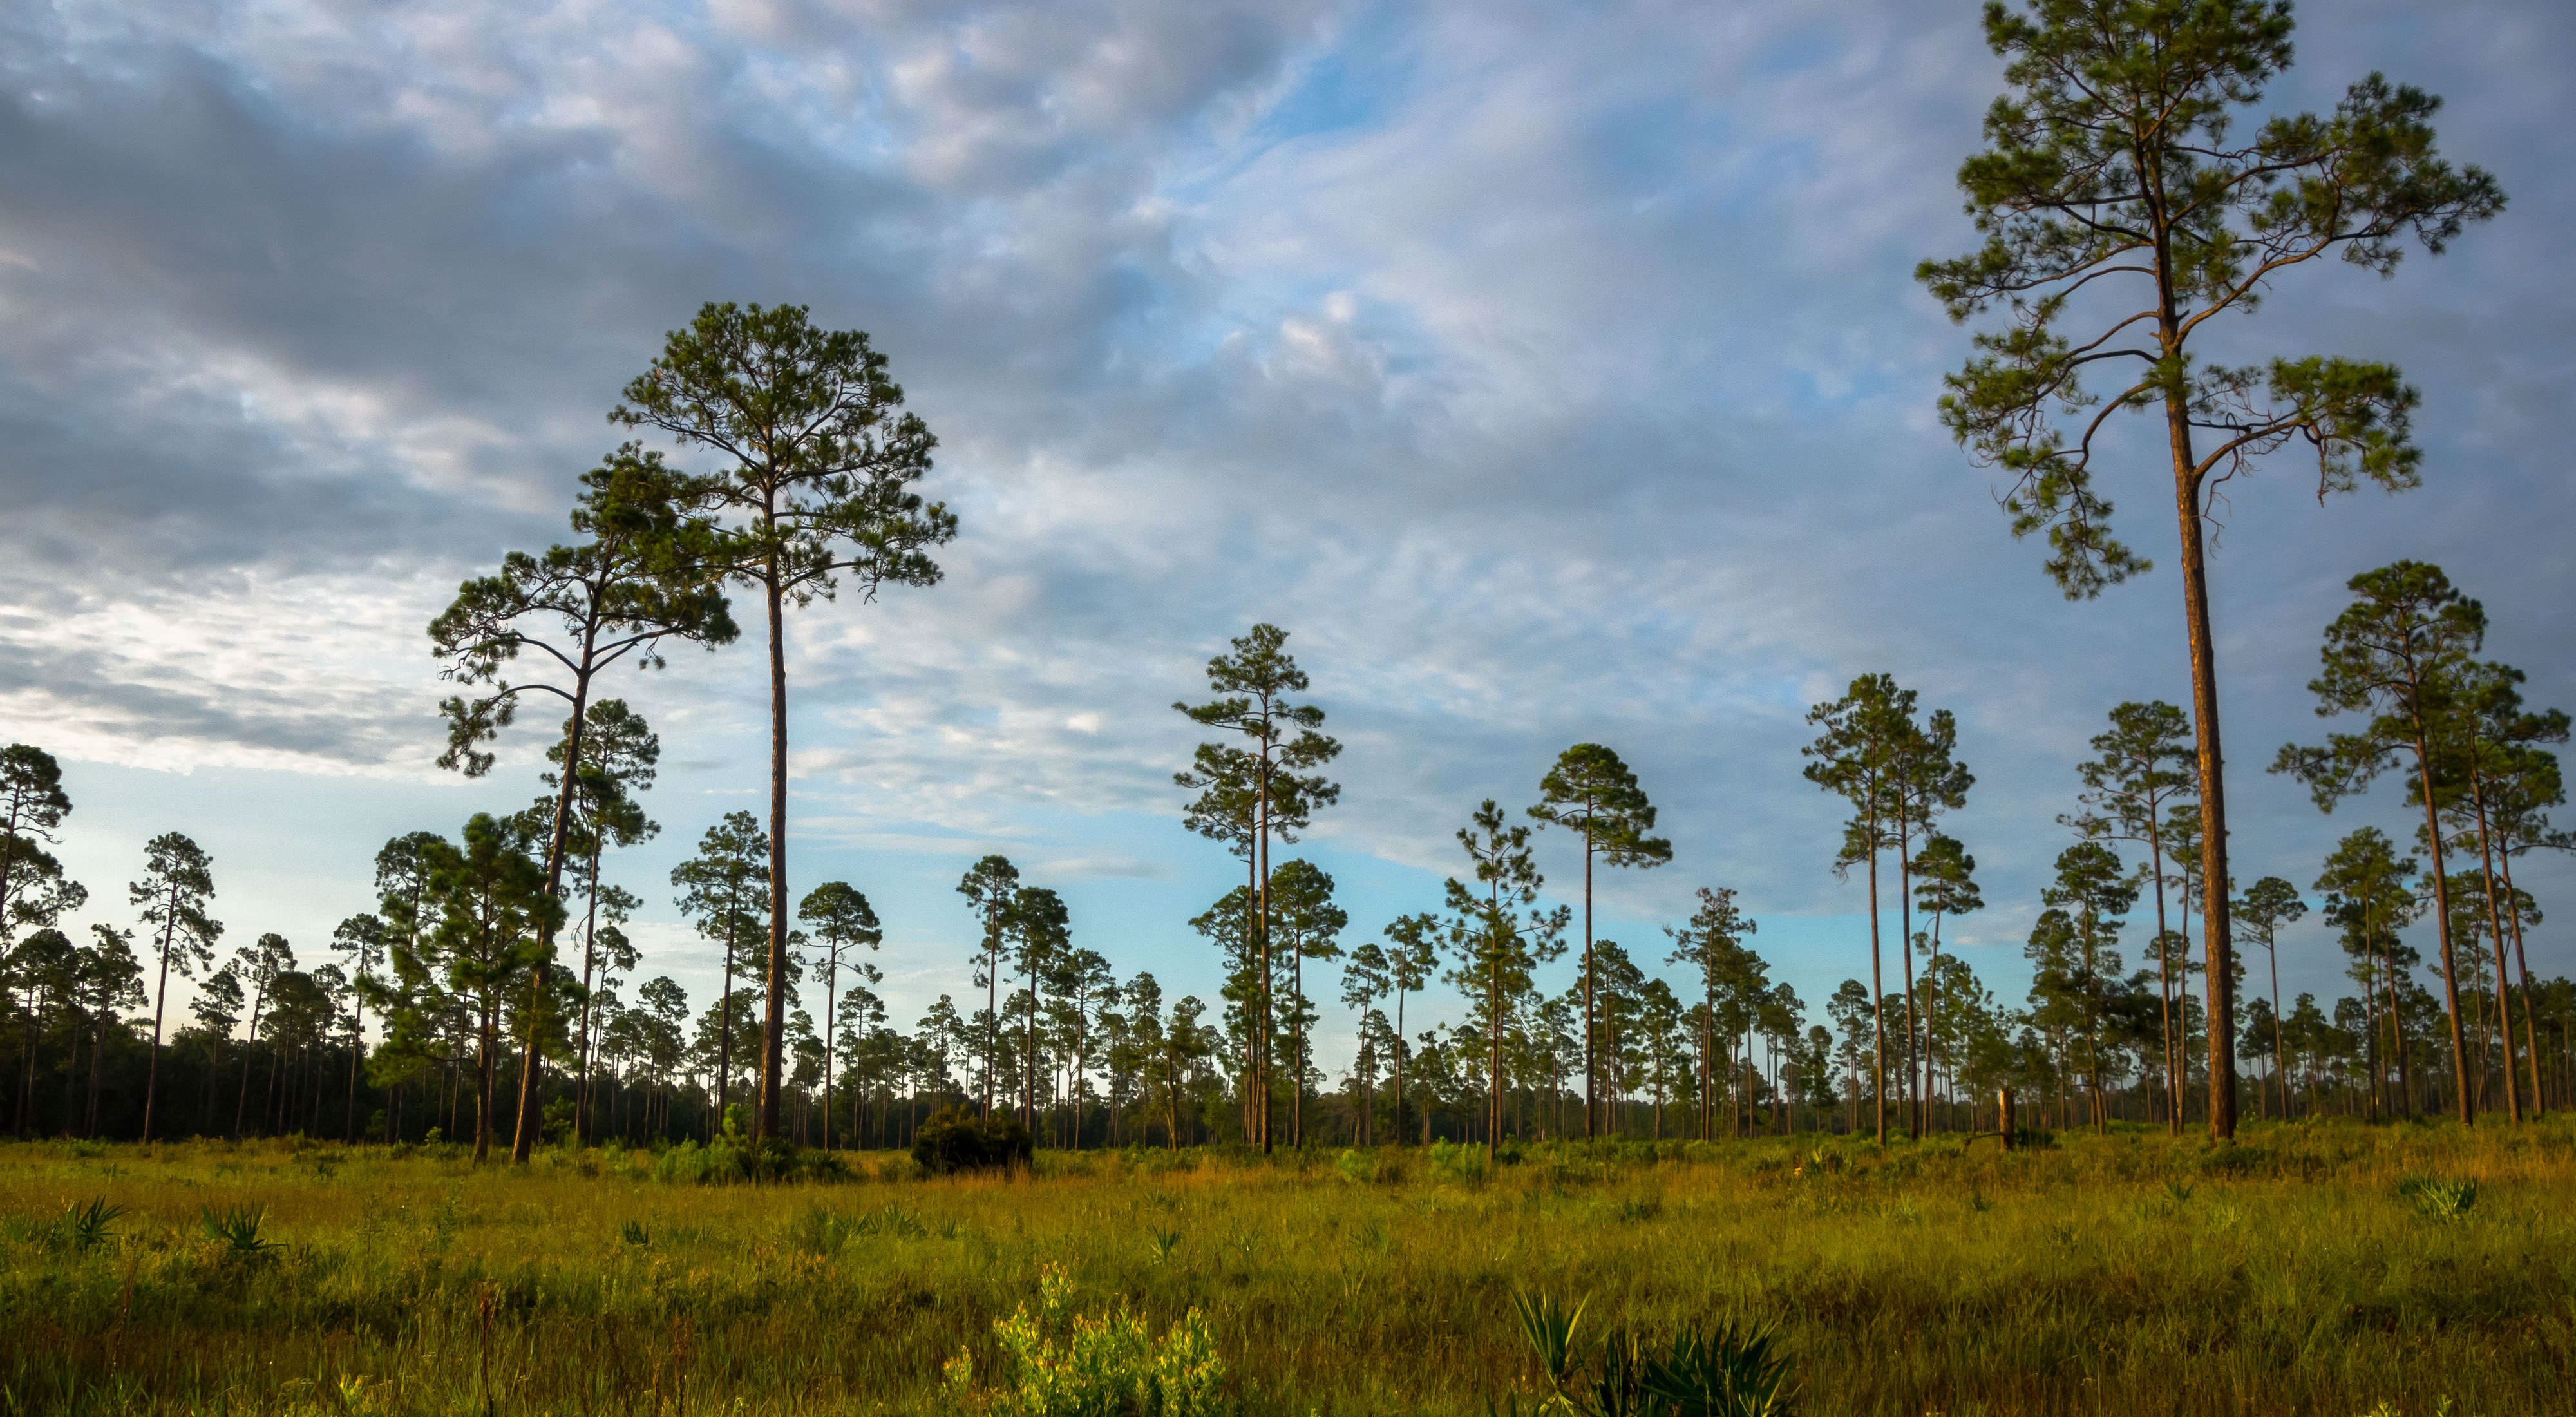 A landscape photo with longleaf pines against a cloudy sky